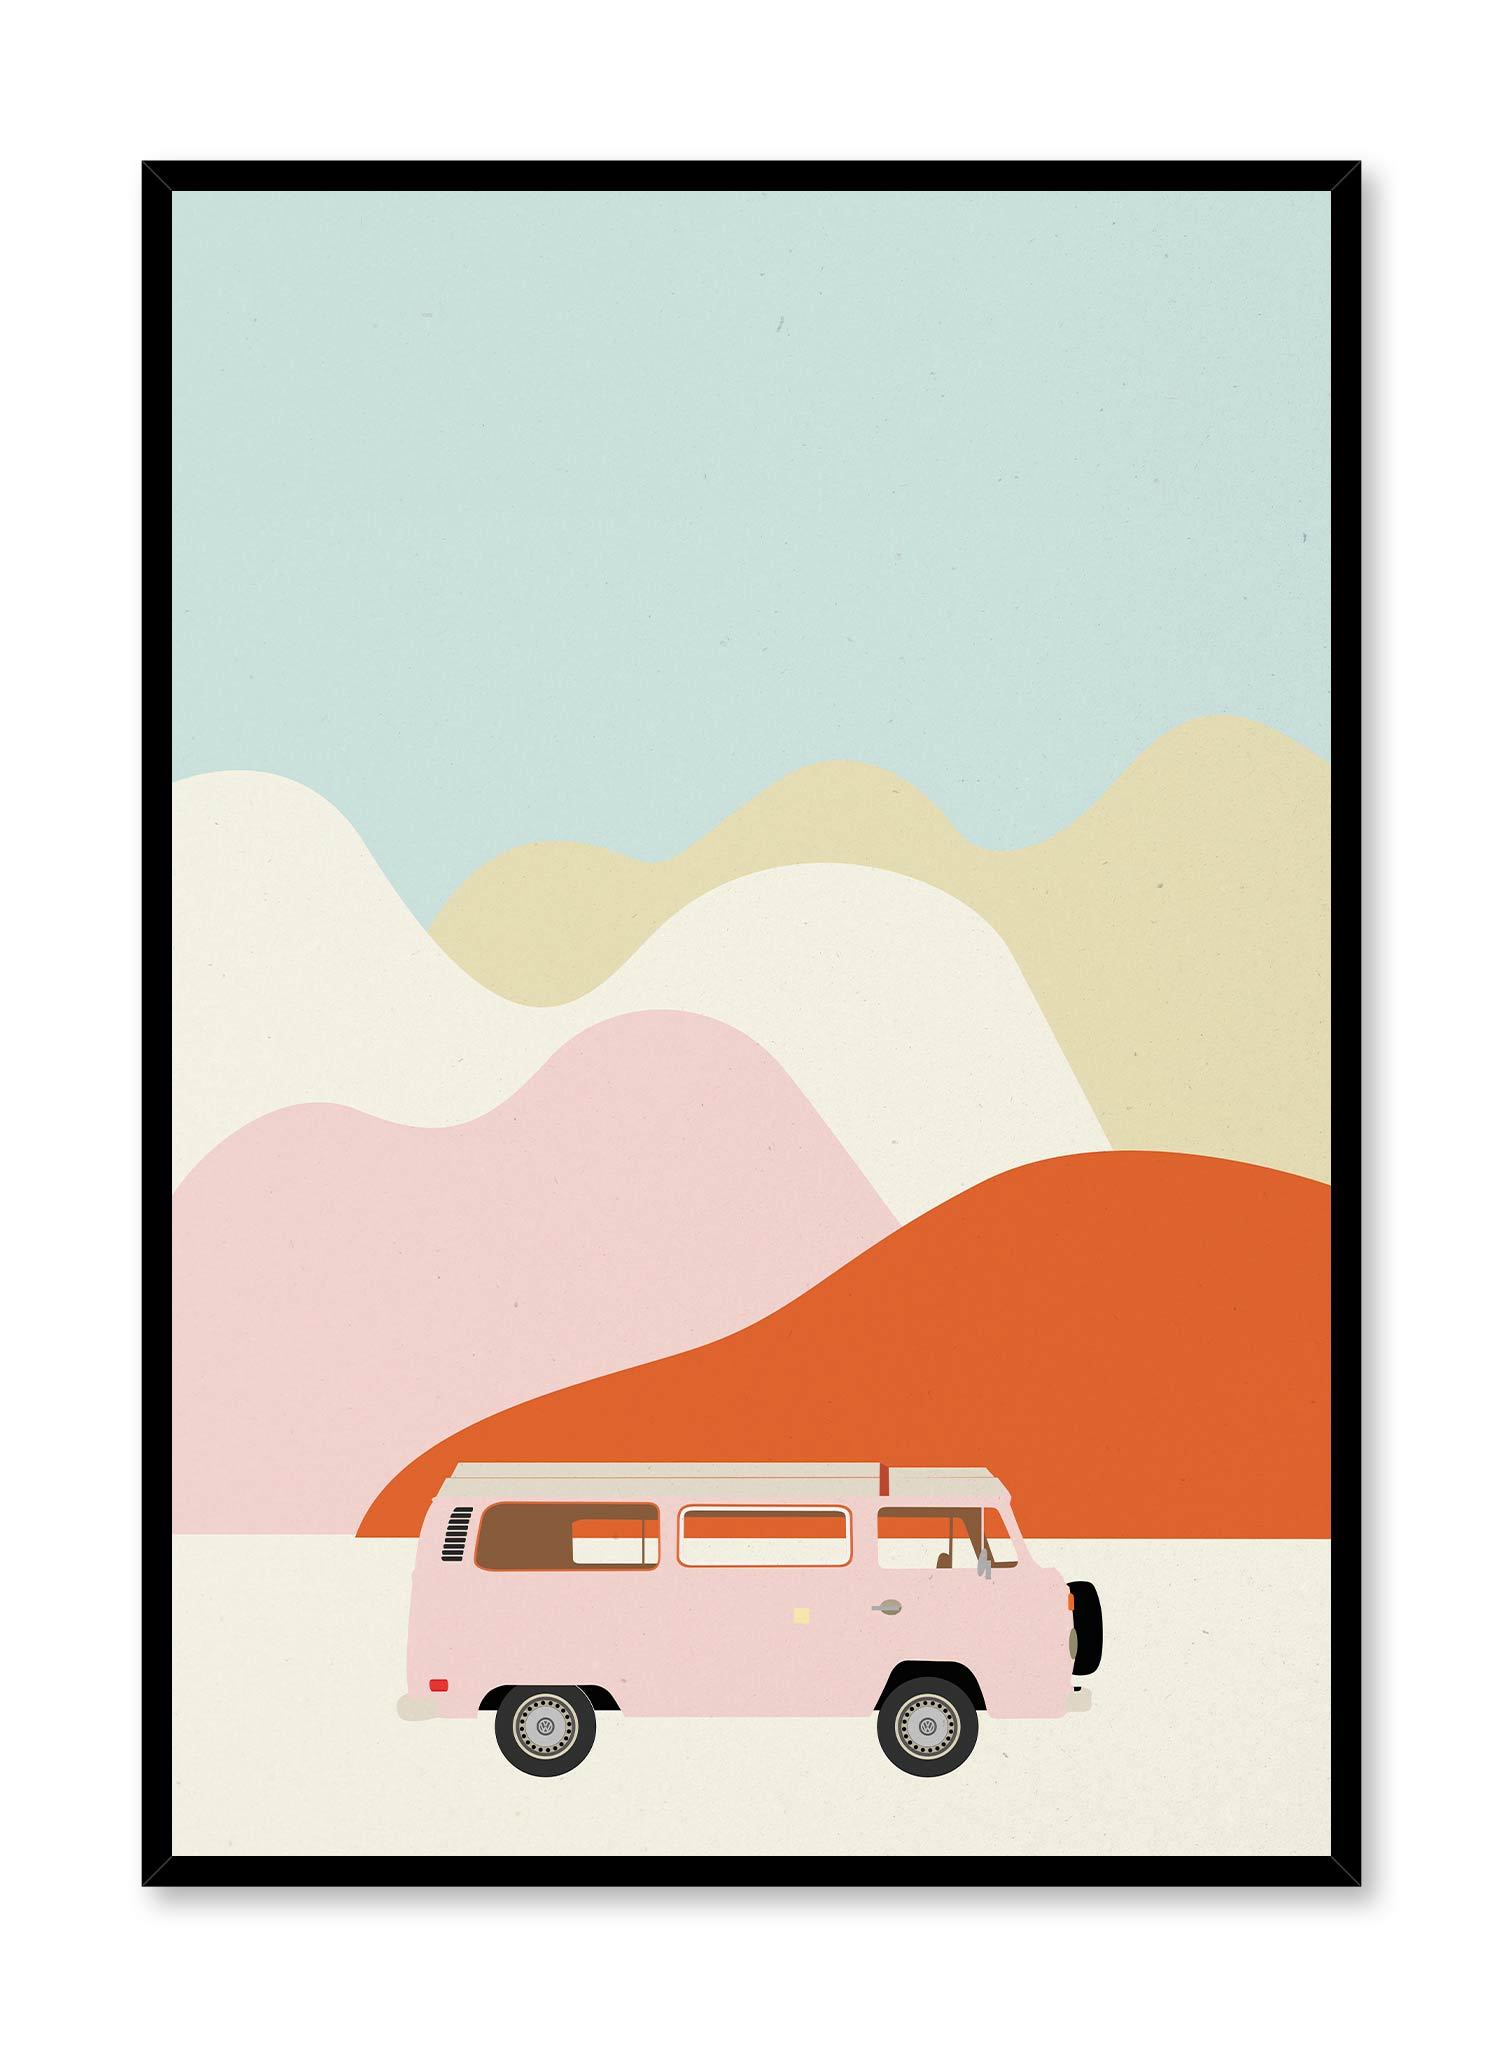 Psychedelic Road Trip is a colourful illustration poster of a pink retro van by Opposite Wall.